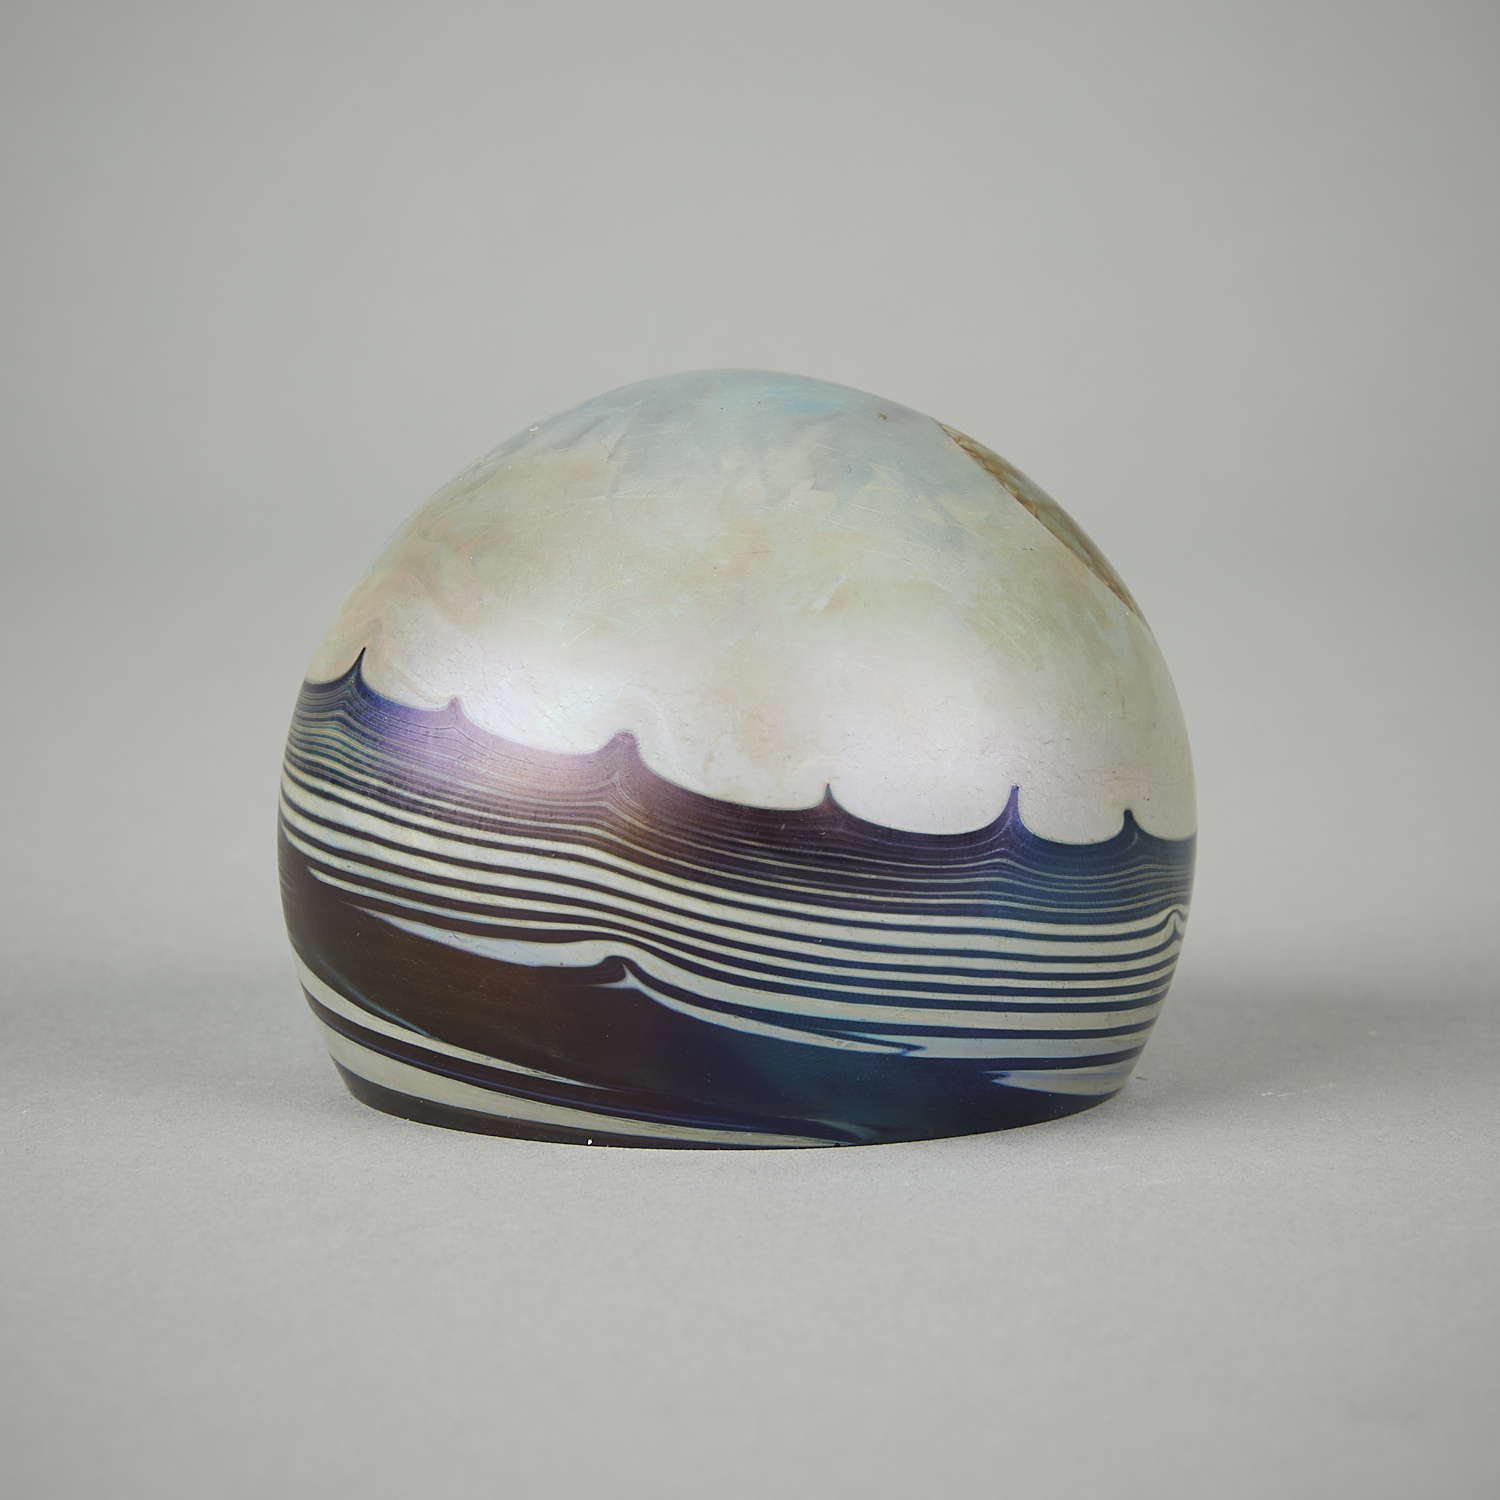 John Lewis Moon Favrile Glass Paperweight 1974 - Image 2 of 5